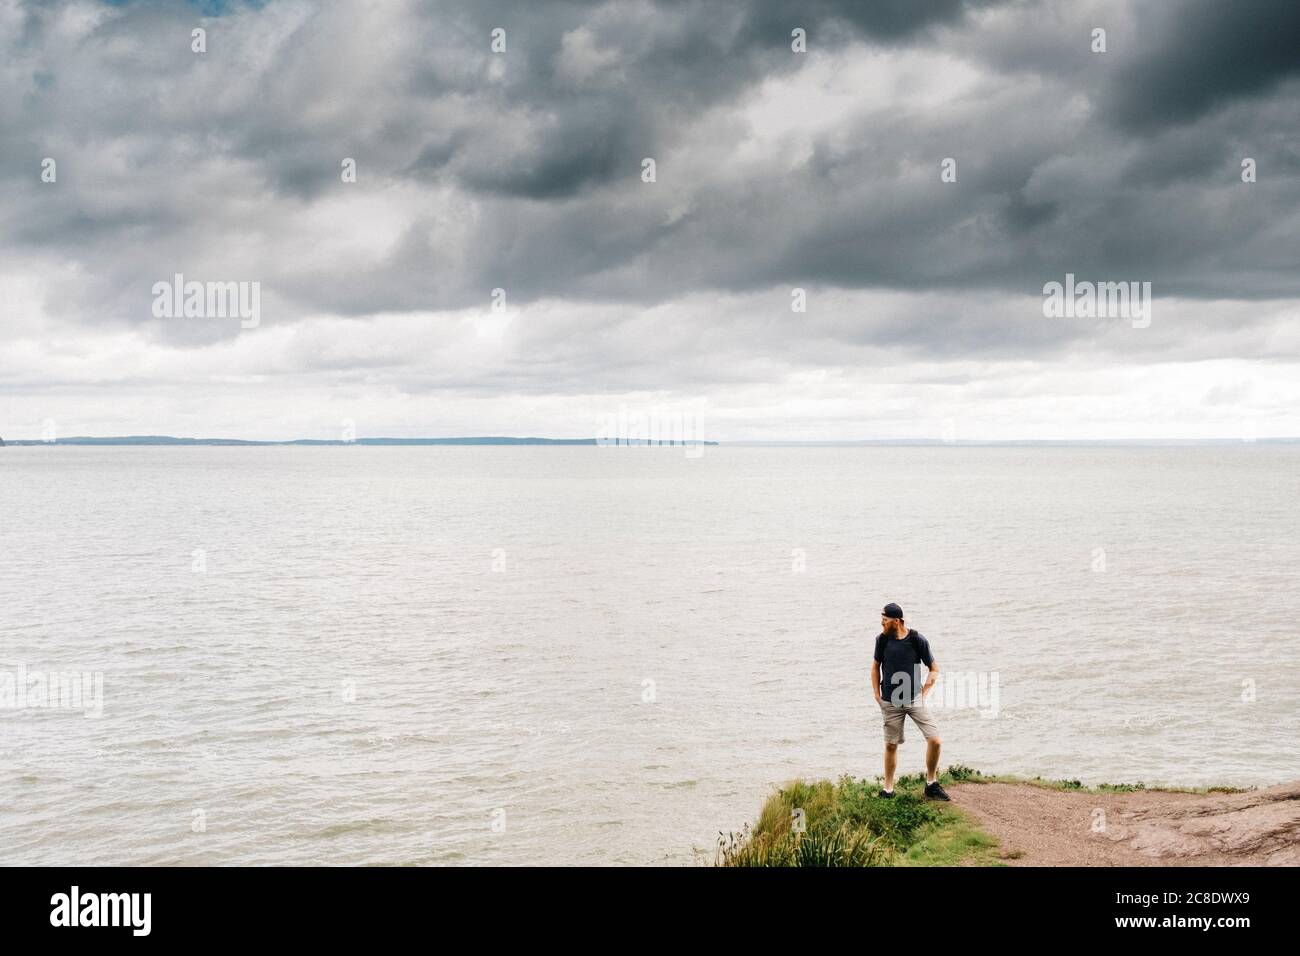 Man standing on cliff while looking at sea against storm clouds Stock Photo